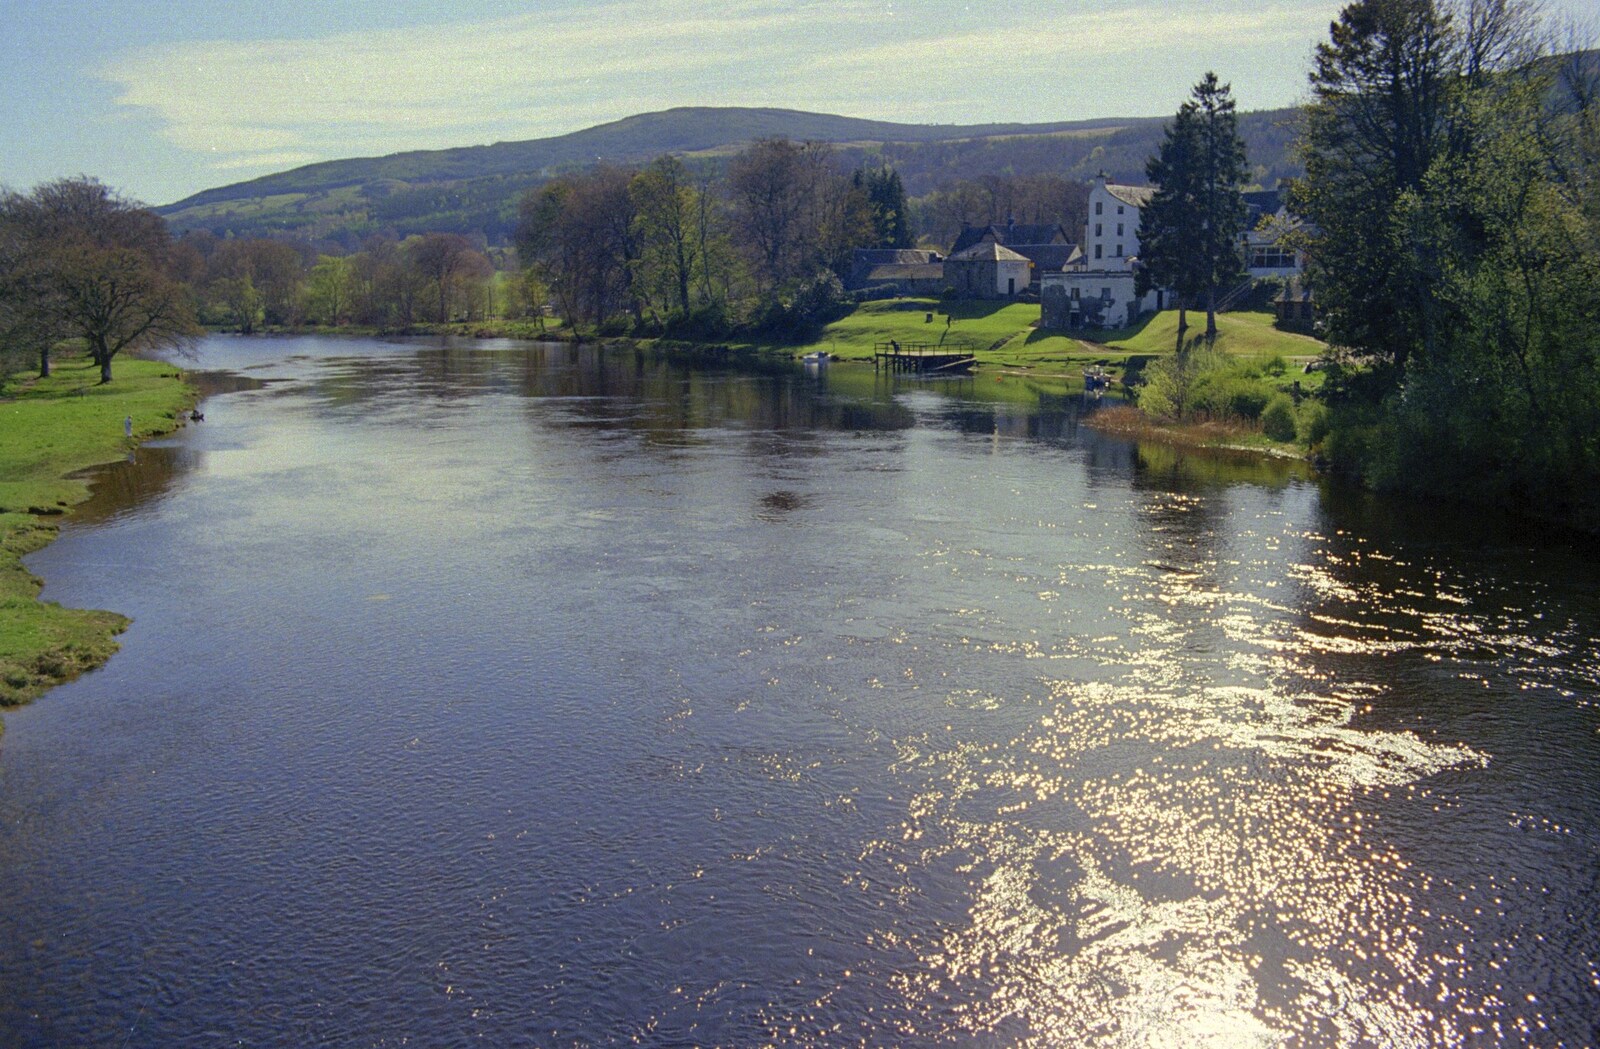 The Aberfeldy distillery and the River Tay from A Trip to Pitlochry, Scotland - 24th March 1998